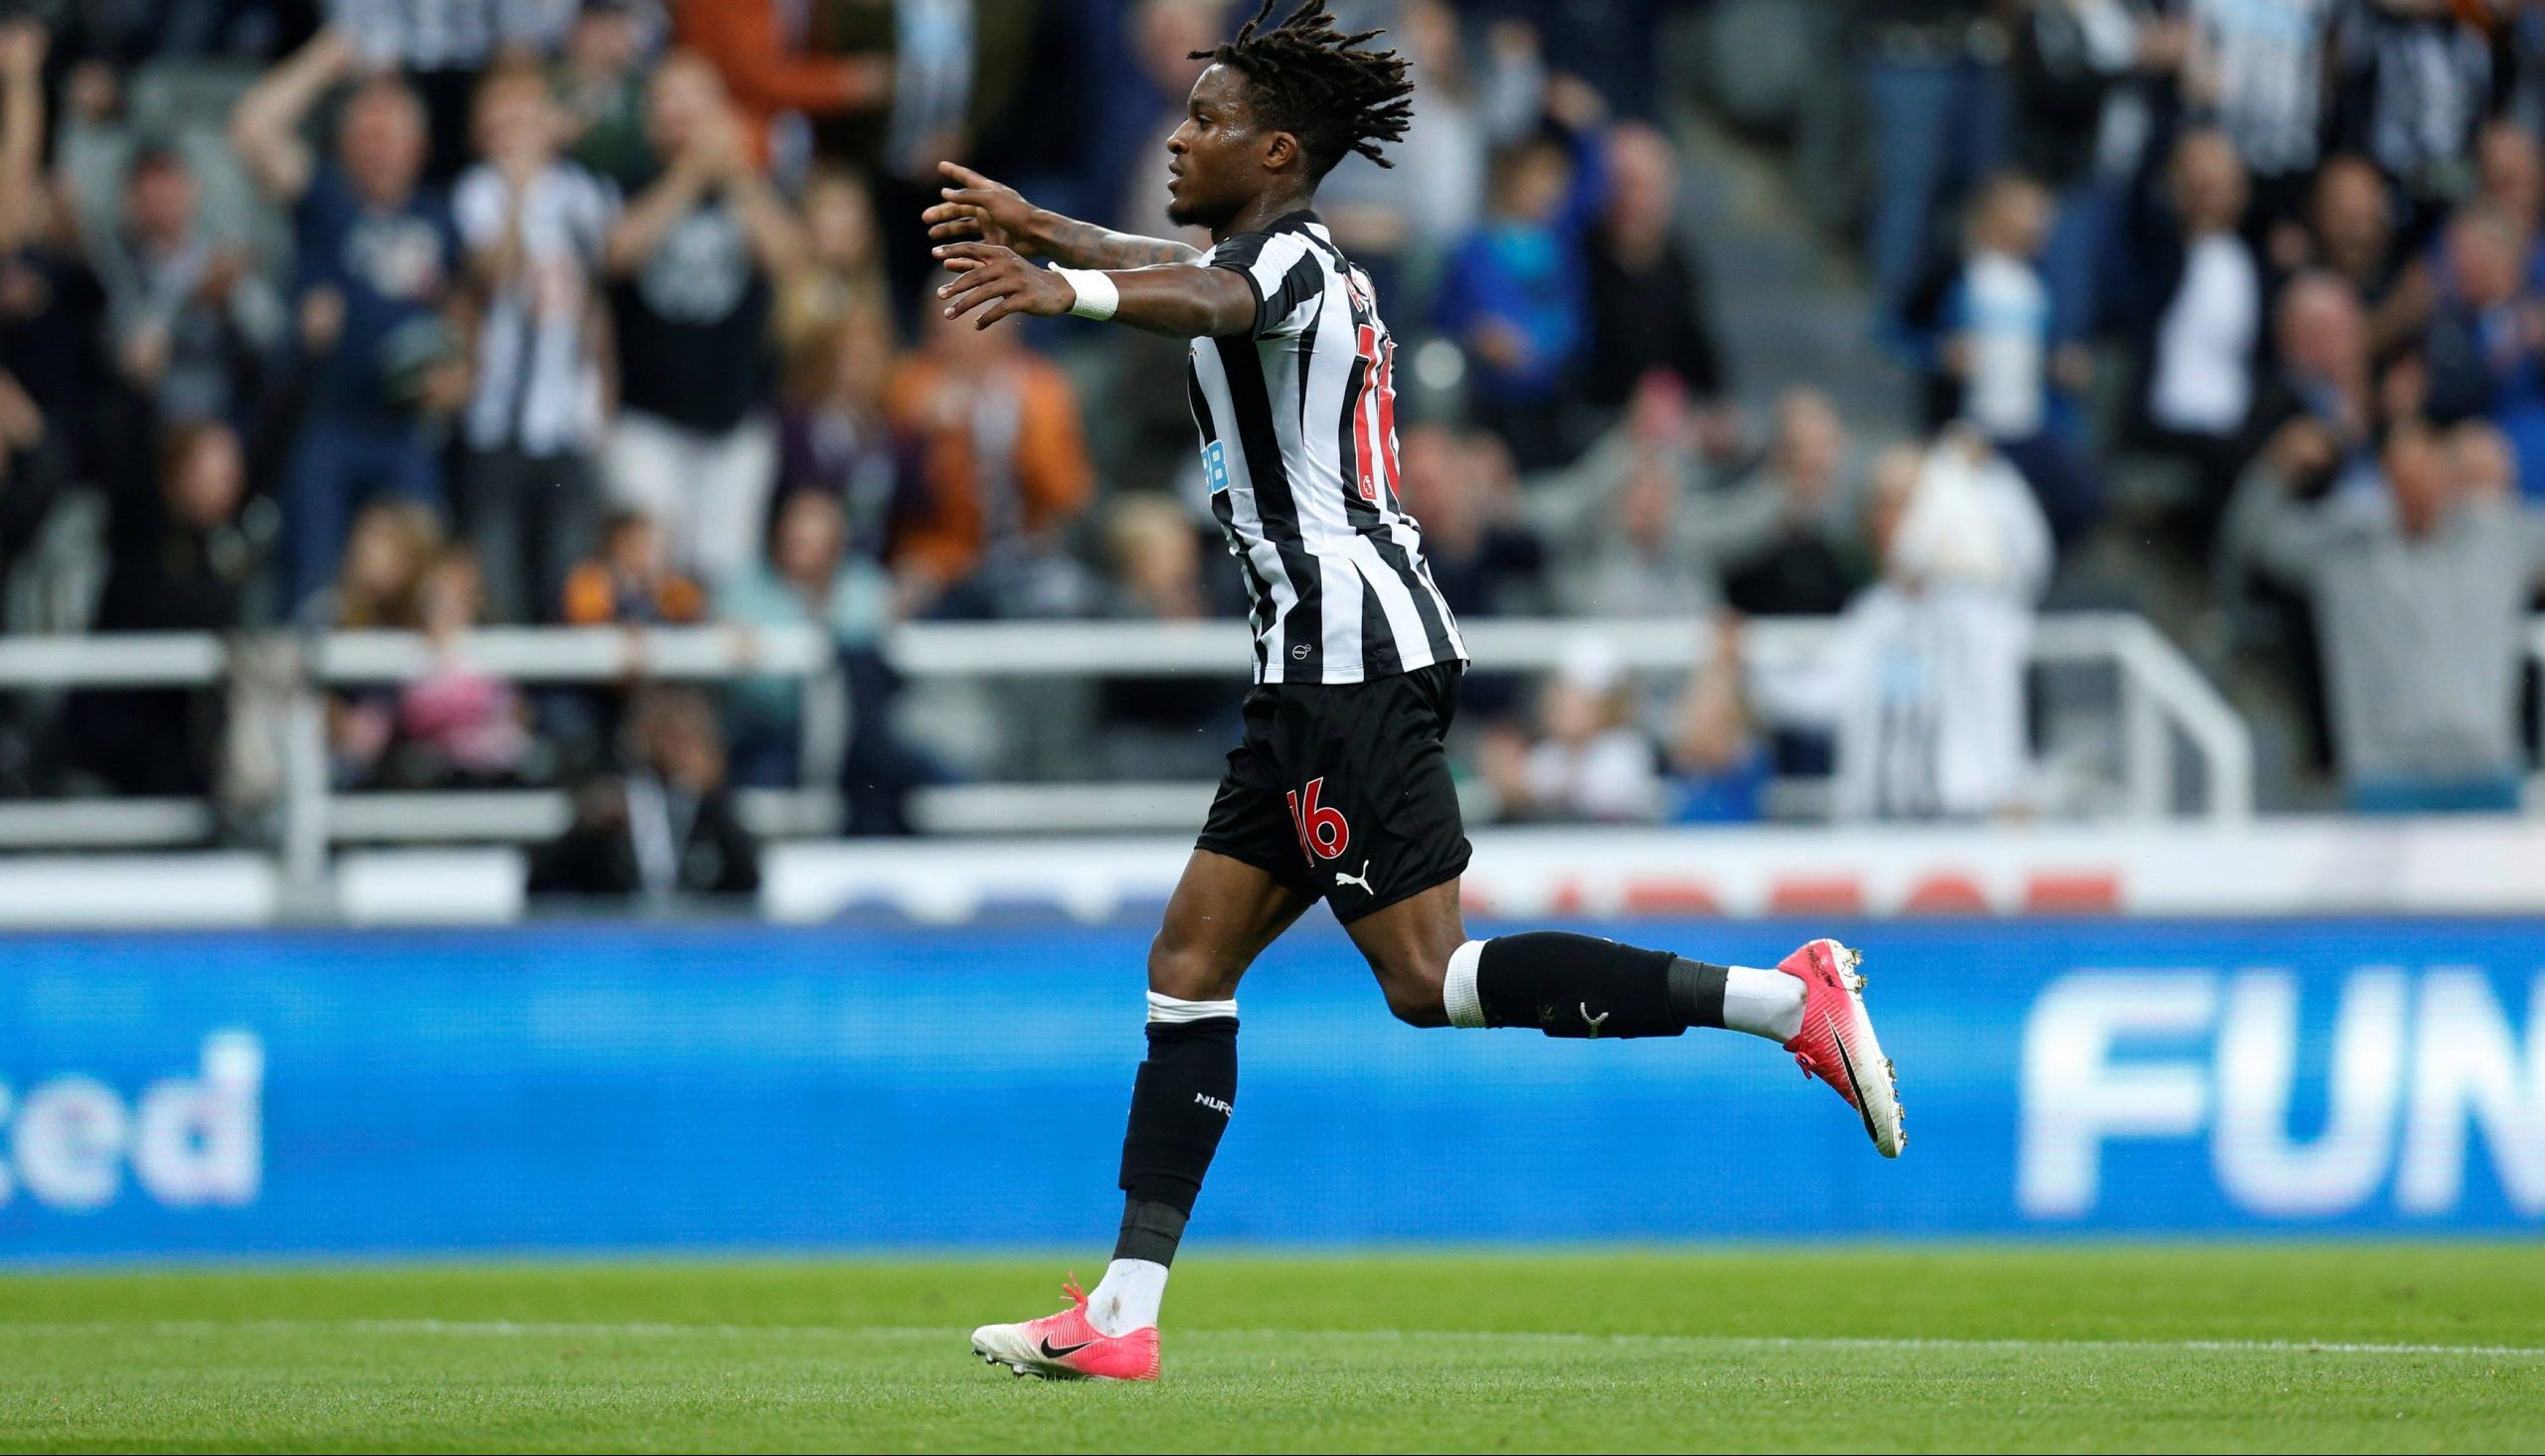 Football Soccer - Carabao Cup - Second Round - Newcastle United vs Nottingham Forest - Newcastle, Britain - August 23, 2017   Newcastle United’s Rolando Aarons celebrates scoring their second goal    Action Images via Reuters/Ed Sykes     EDITORIAL USE ONLY. No use with unauthorized audio, video, data, fixture lists, club/league logos or 